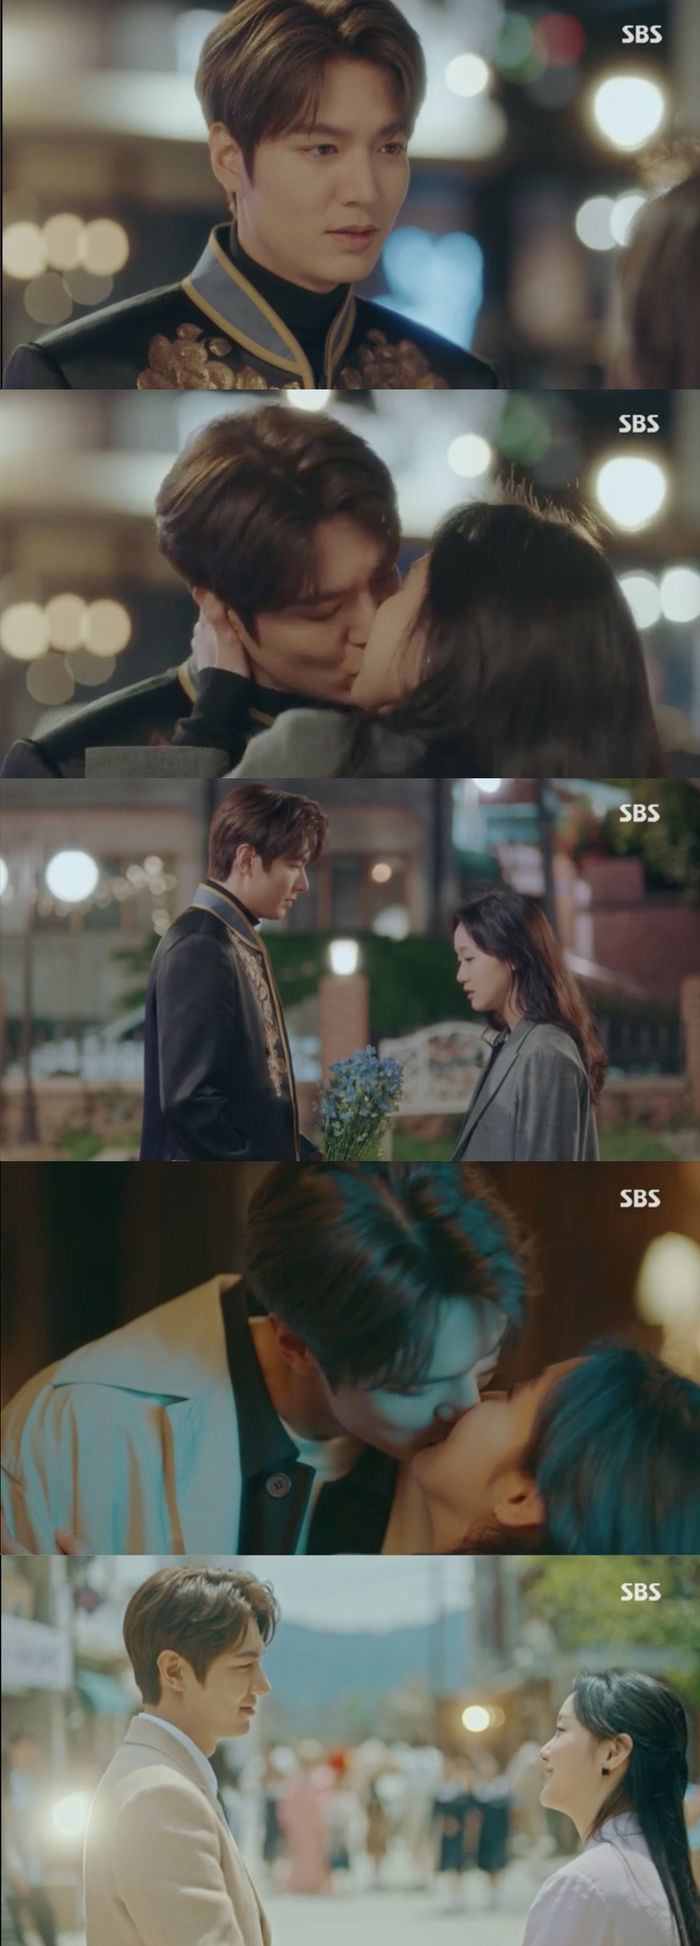 Lee Min-ho and Kim Go-eun have had a Happy Endings.In the final episode of SBSs The King - Eternal Monarch broadcast on the 12th, Lee Min-ho and Kim Go-eun, who face fate, were portrayed.On the show, Lee Gon returned to the Korean Empire inverted night and removed the dream, but saving his young self was not successful and the future changed.Lee Ji-hoon (Lee Min-ho Boone) of South Korea survived instead of the death of Igon of Korean Empire.And Buyeong-gun saved Kang Hyun-min (Kim Kyung-nam) of Korean Empire.Also, it was the mother of Gu Seo-ryeong (Jung Eun-chae) who took care of Kim Go-eun of Korean Empire.Jung Tae-eul, who crossed the door of the dimension, returned to his place. It was only a week or so for Jung Tae-eul, but there was no more Kang Shin-jae who kept his side silent.And Igon, who came back a few times, did not come back anymore.Jeong Tae-eul came across Lee Ji-hoon, but Lee Ji-hoon did not remember Jeong Tae-eul; at that time, Lee Gon opened the door of the world to find Jeong Tae-eul.However, Jung Tae-eul, who he met, was not the person he was looking for.In 2021, when I heard that South Korea had a white horse in front of the house, I felt that Igon had returned.Unbeknownst to the fact that the person in front of his eyes was his own, he said, Why are you crying? You looked happy everywhere.Why do you think you know me? Why do you think youre remembering me?And when I saw the tearful state, I said, You, you. You are the real one? Finally I met you.Lee explained that it took time to find a situation because of various things.And he had a long hug with Jung Tae-eul. I wanted to see you forget me. I tried to tell you everything.I am the Korean Empire Emperor, and I dont want to be called Igon, but how do you remember me when the two worlds have flowed differently?So Jung Tae-eul kissed Leeon, saying, I skip that. I had a lot of things. Lee then told Jung Tae-eul about the commercialization.And he said, I have not said this yet, I love you. I love you so much. He said, This is the completion.I love you too, I love you so much, I responded to Egons Confessions.Since then, Igon and Jung Tae have crossed the door of the dimension every weekend and enjoyed the parallel World Travel and promised to live every day in love with their fate.